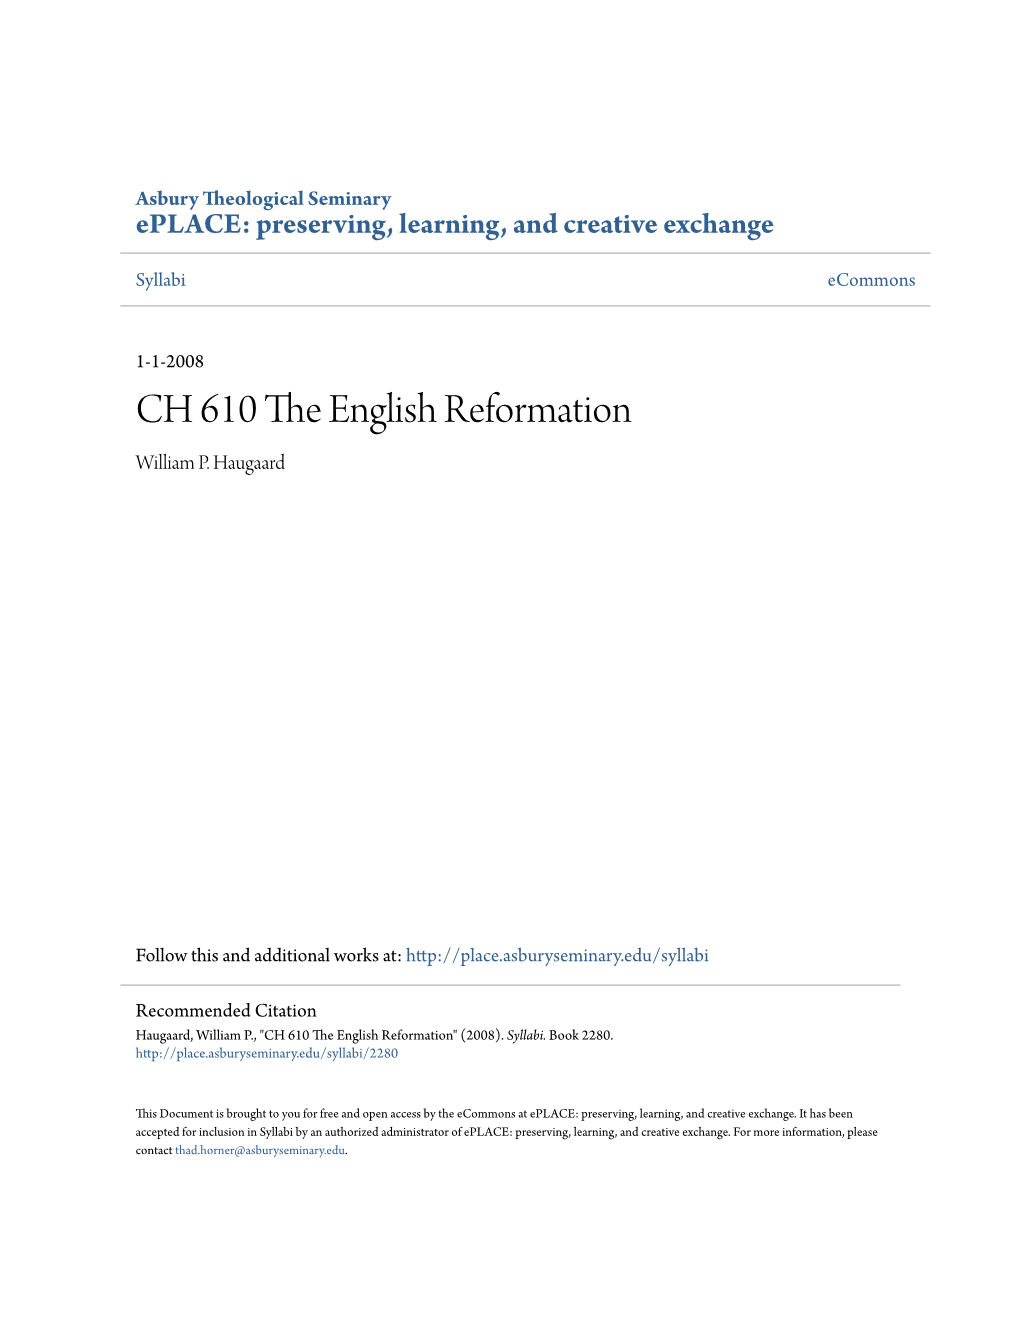 CH 610 the English Reformation